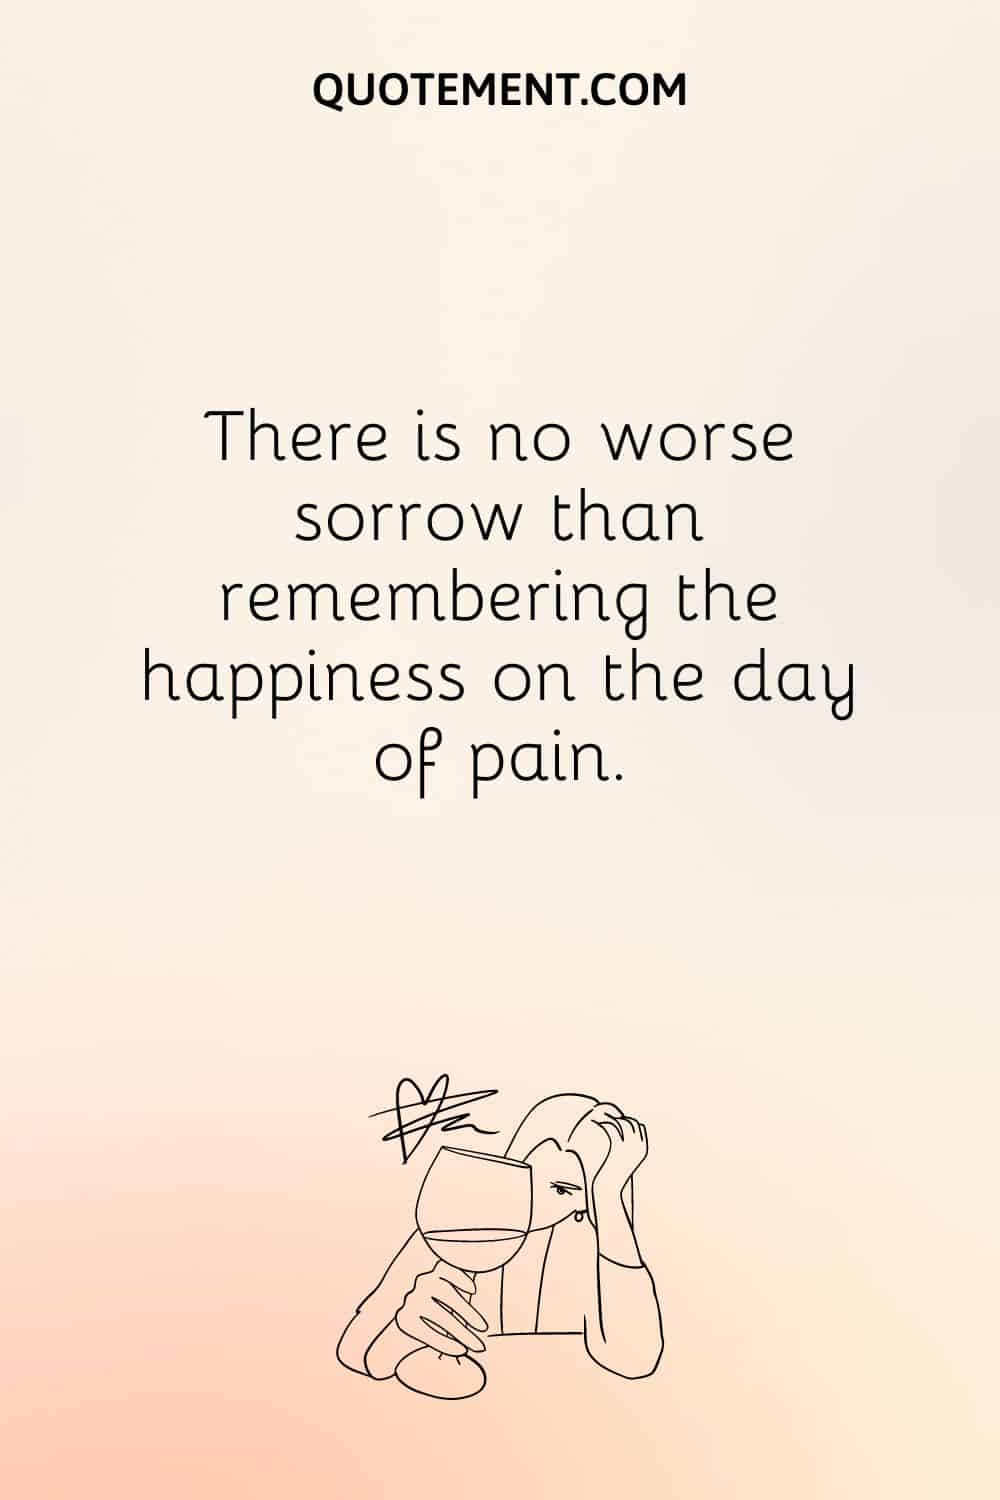 There is no worse sorrow than remembering the happiness on the day of pain.